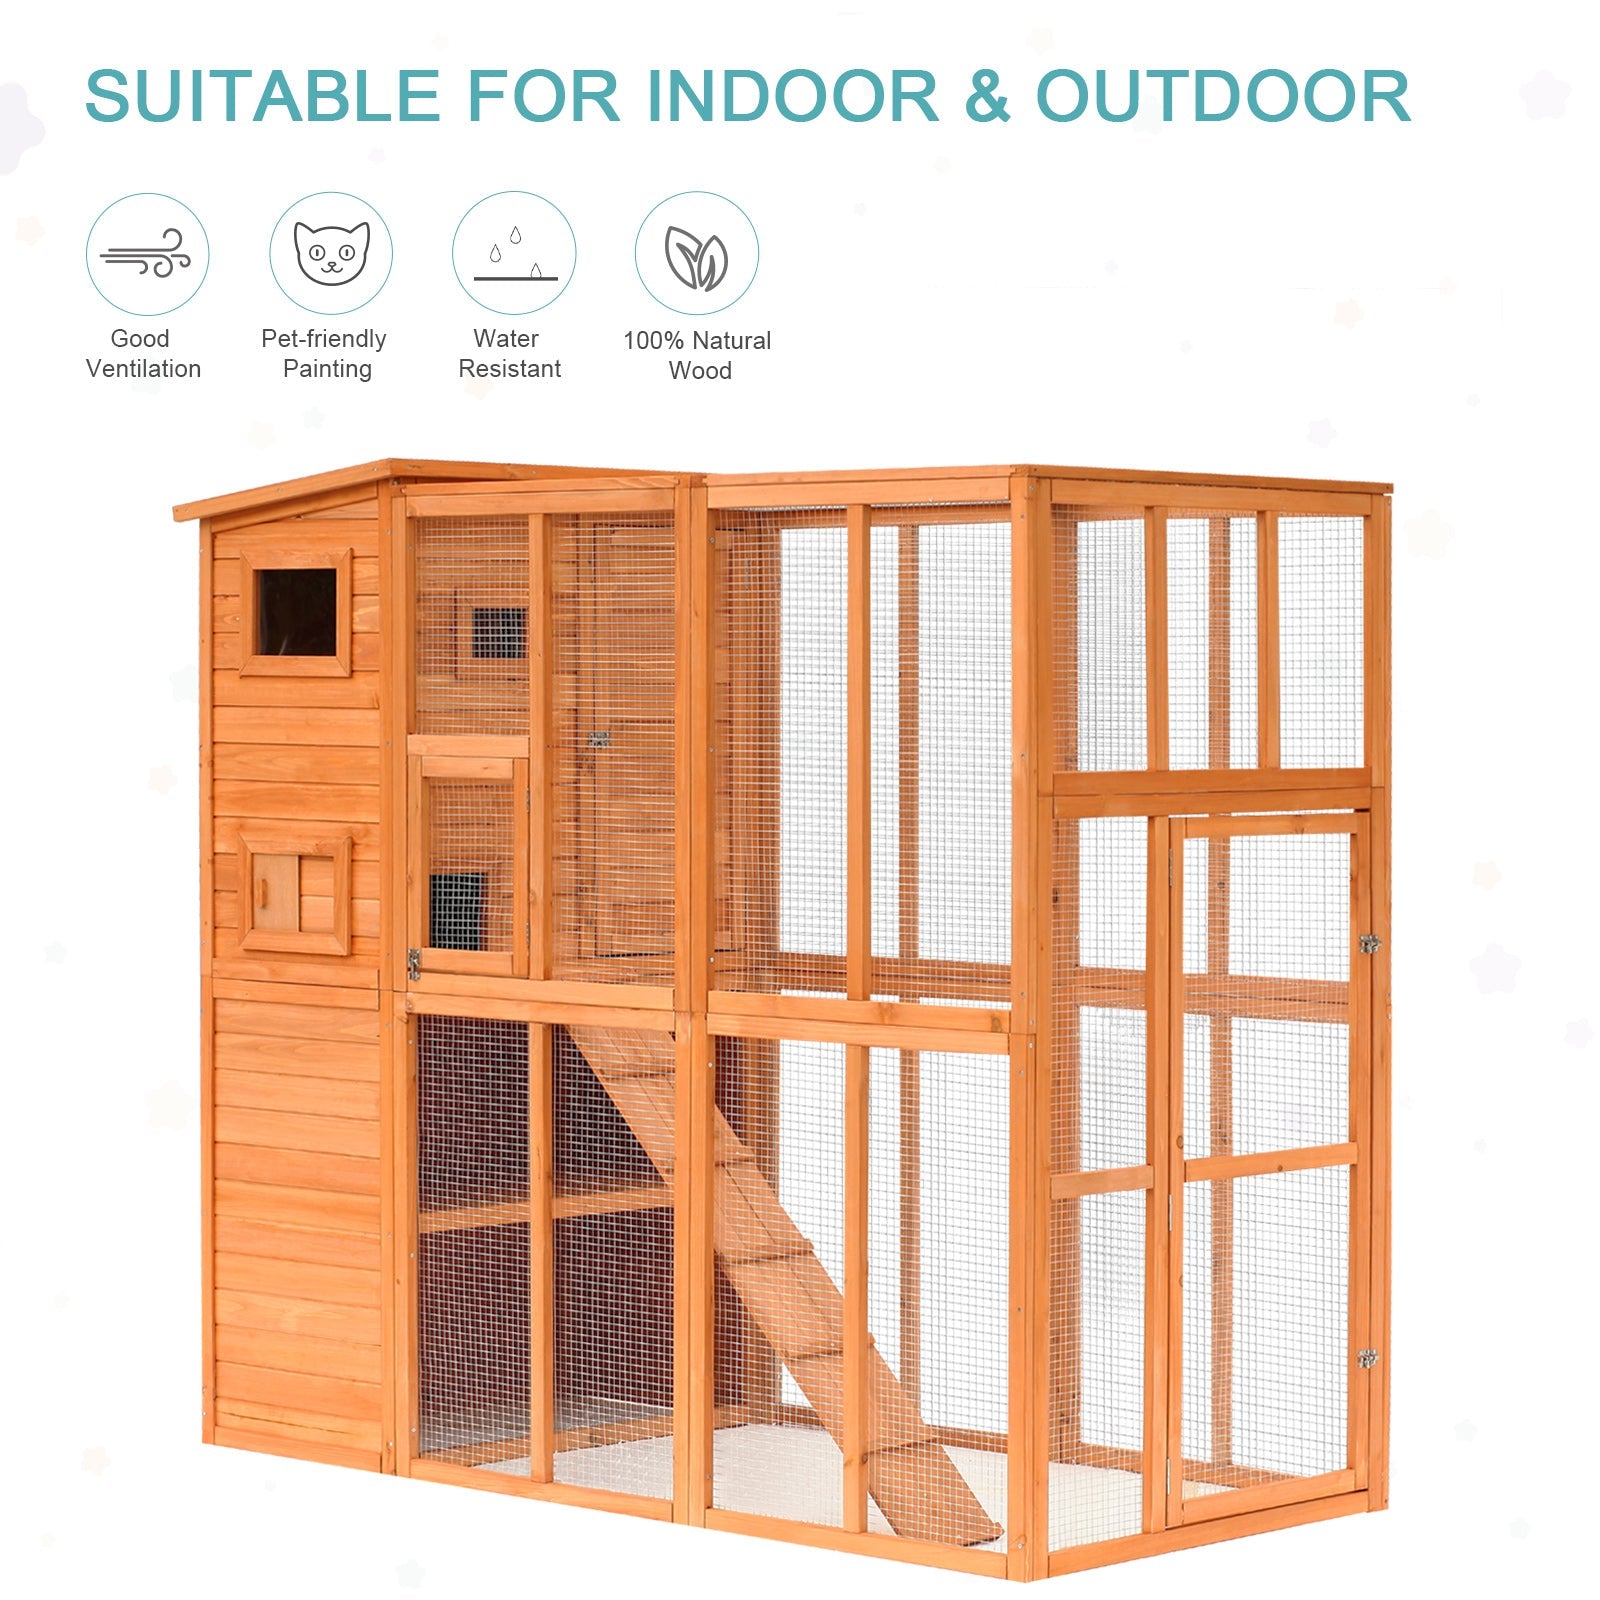 Large Wooden Outdoor Cat House with Large Run for Play, Catio for Lounging, and Condo Area for Sleeping, Natural at Gallery Canada